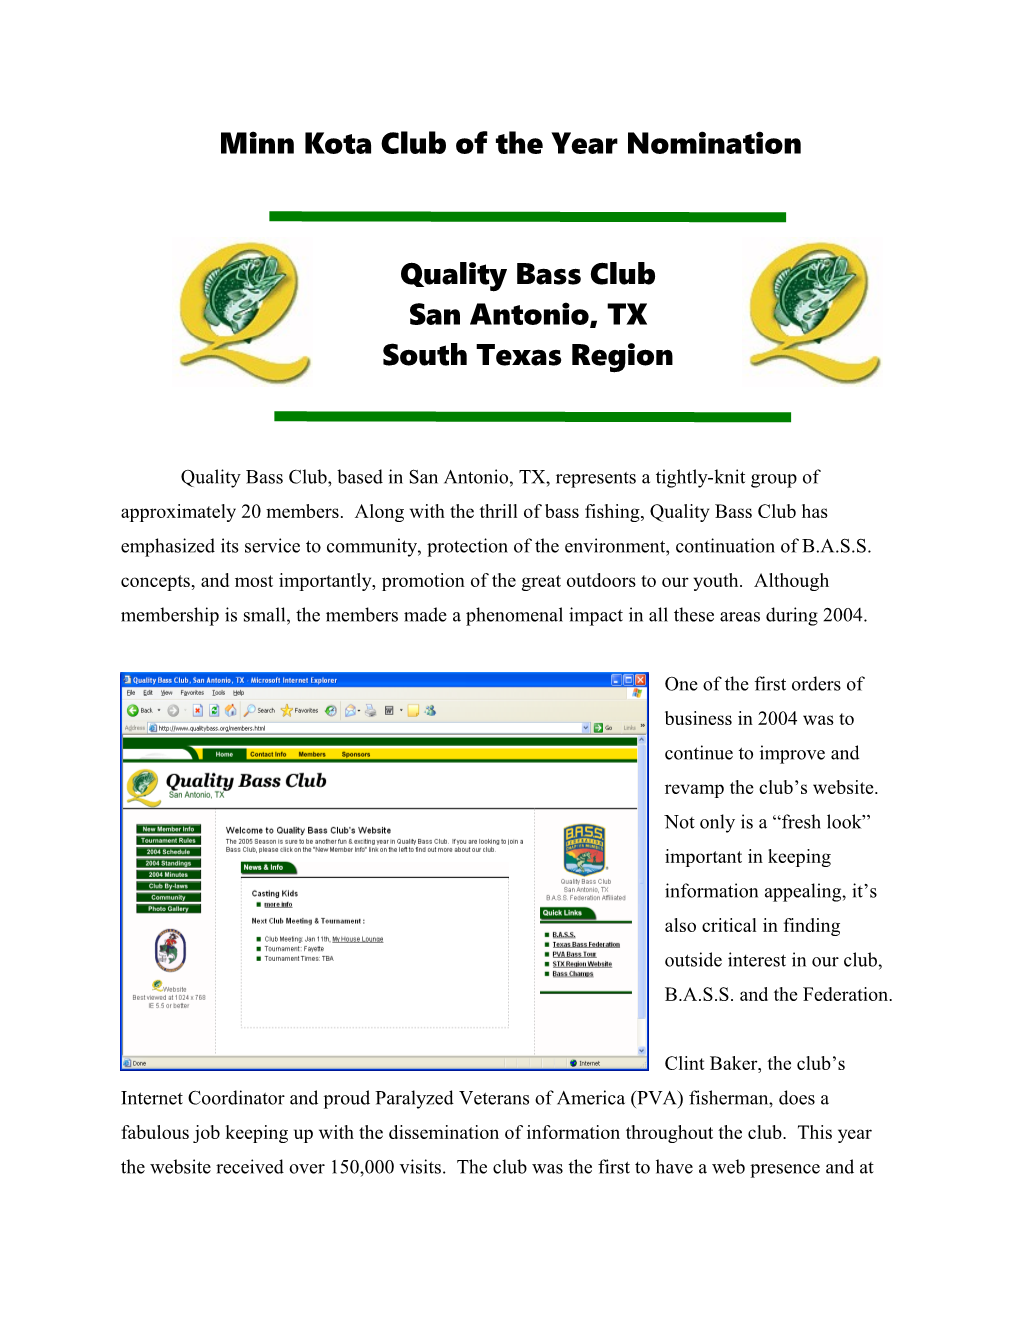 Quality Bass Club, Headed in San Antonio, TX, Represents a Tighly Knit Group of 15 Permanent